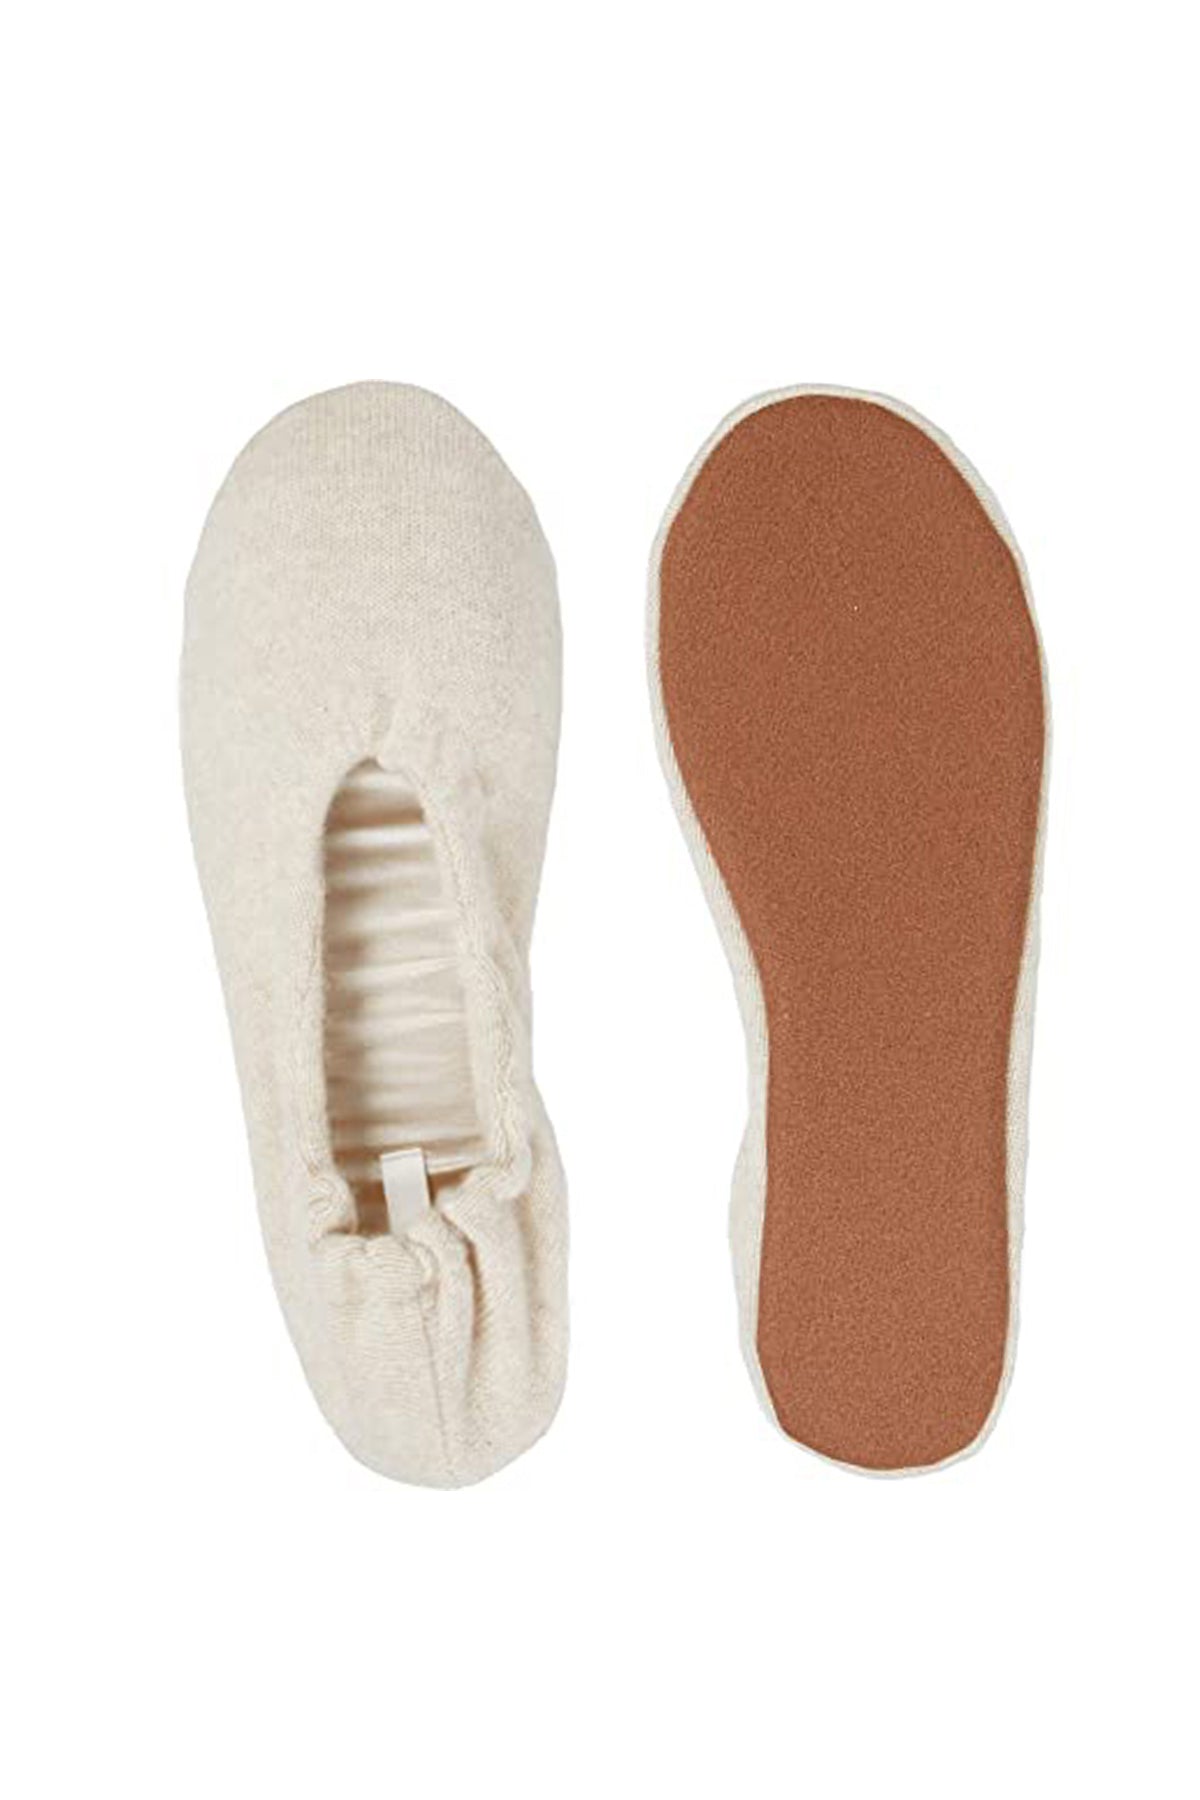 A pair of Cashmere Ballet Flat Slippers by Skin on a white surface, exuding timeless elegance.-15274767515841